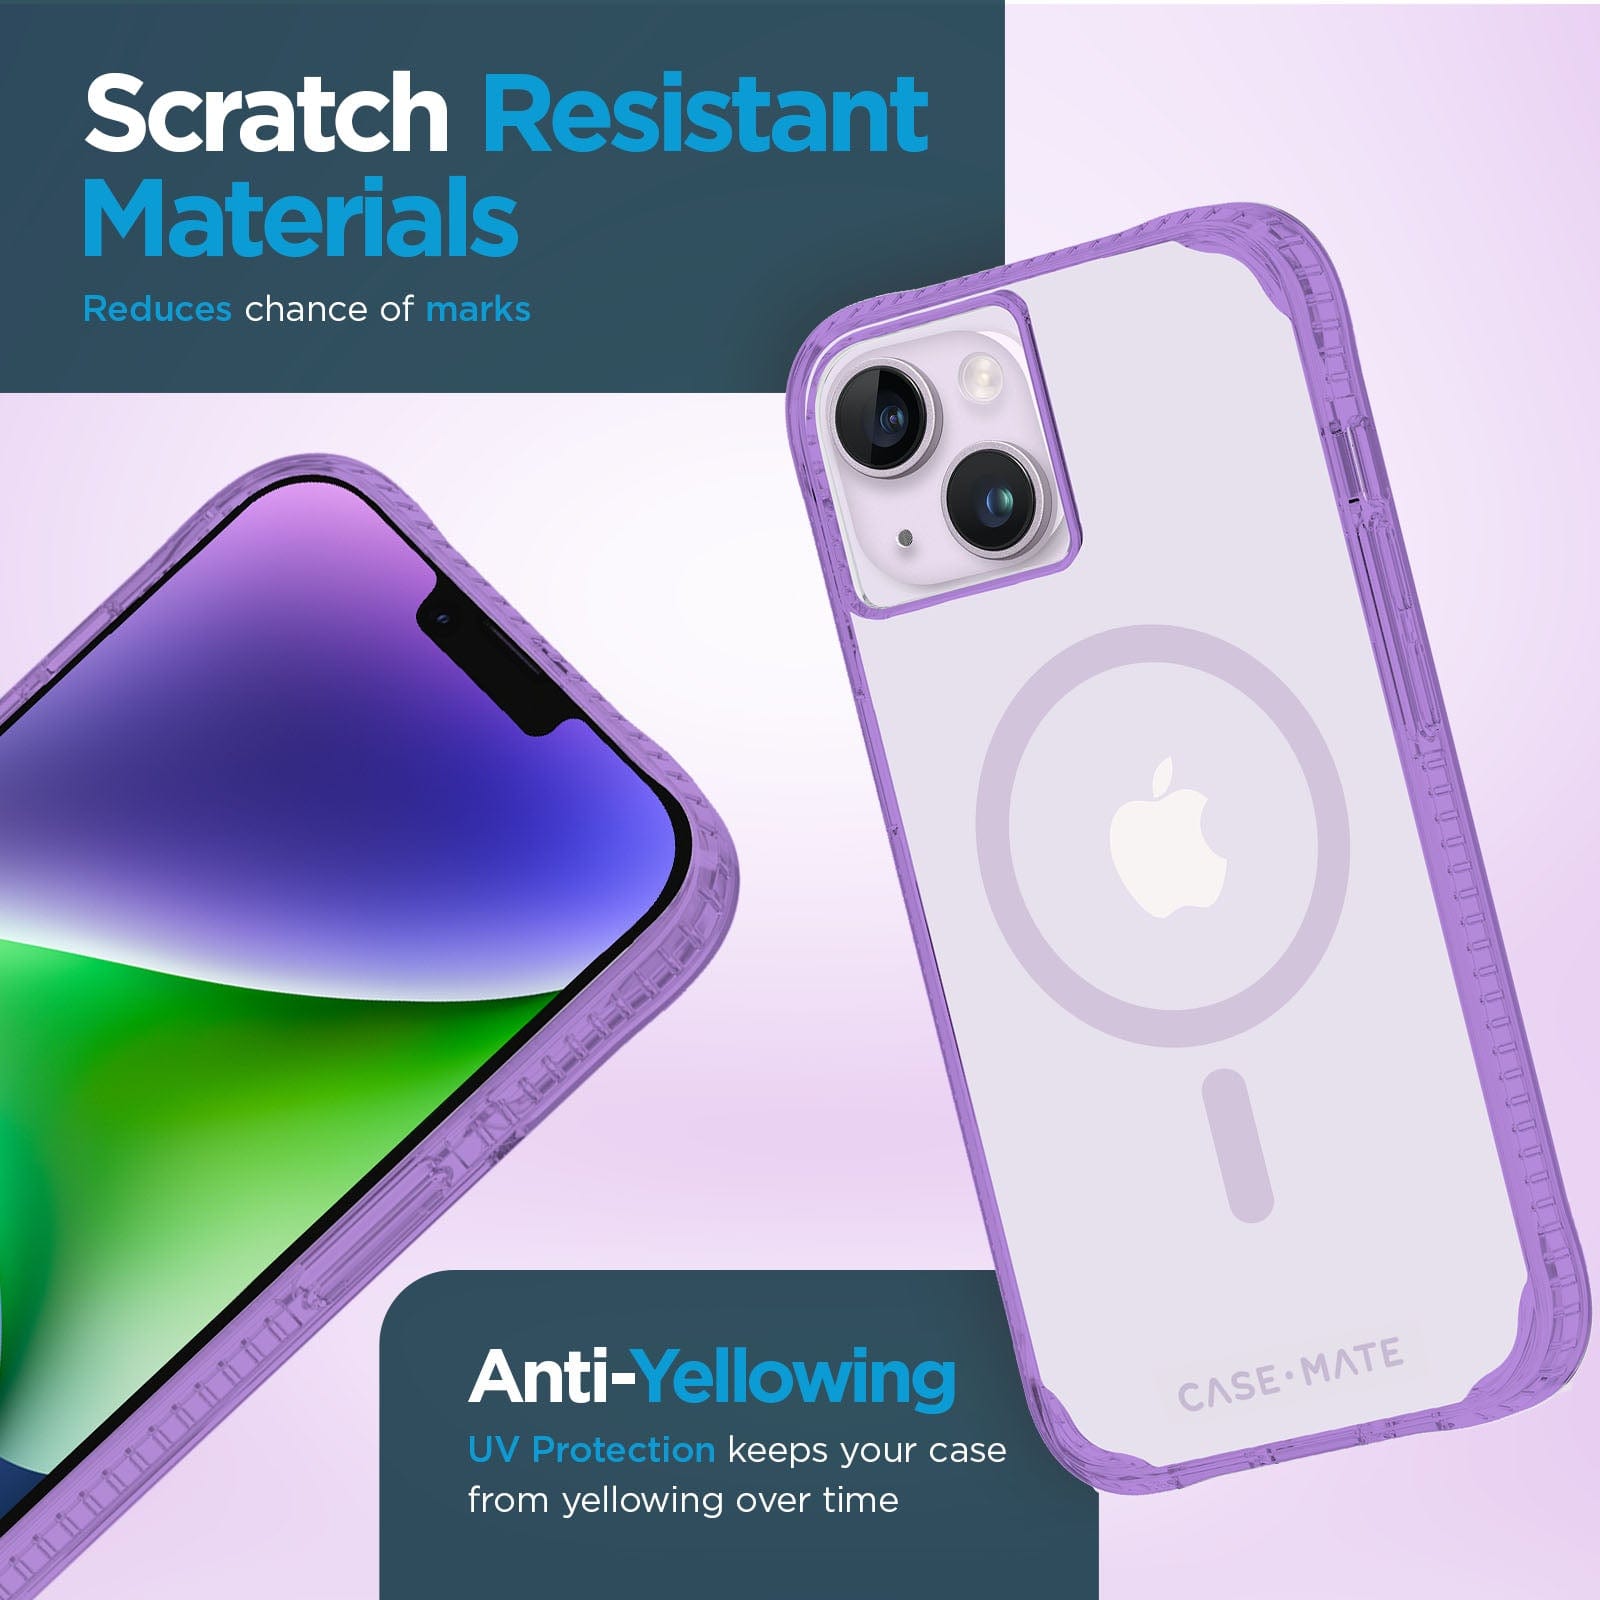 Scratch resistant materials reduce chance of marks. Anti-yellowing UV protection keeps your case from yellowing over time. 